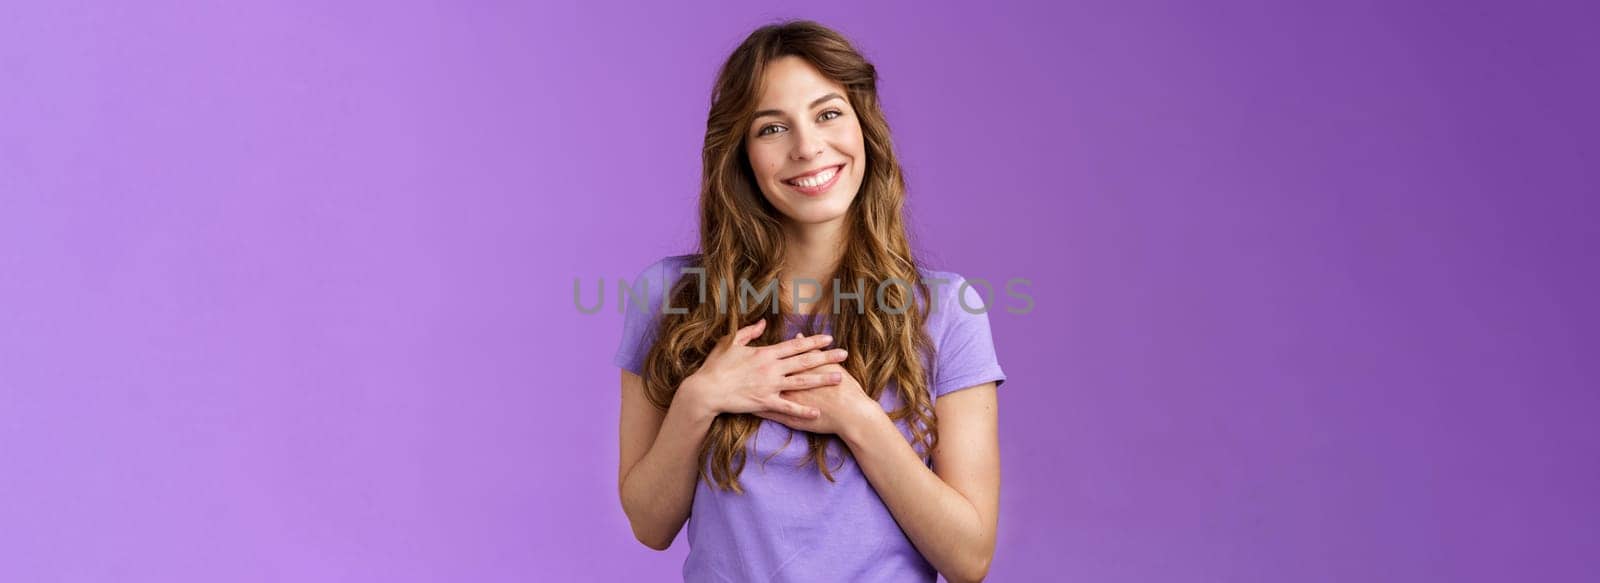 Tender charming grateful lovely curly-haired girl feel delighted sympathy touch heart cherish cute heartwarming date smiling broadly stand purple background joyful grateful appreciate effort.